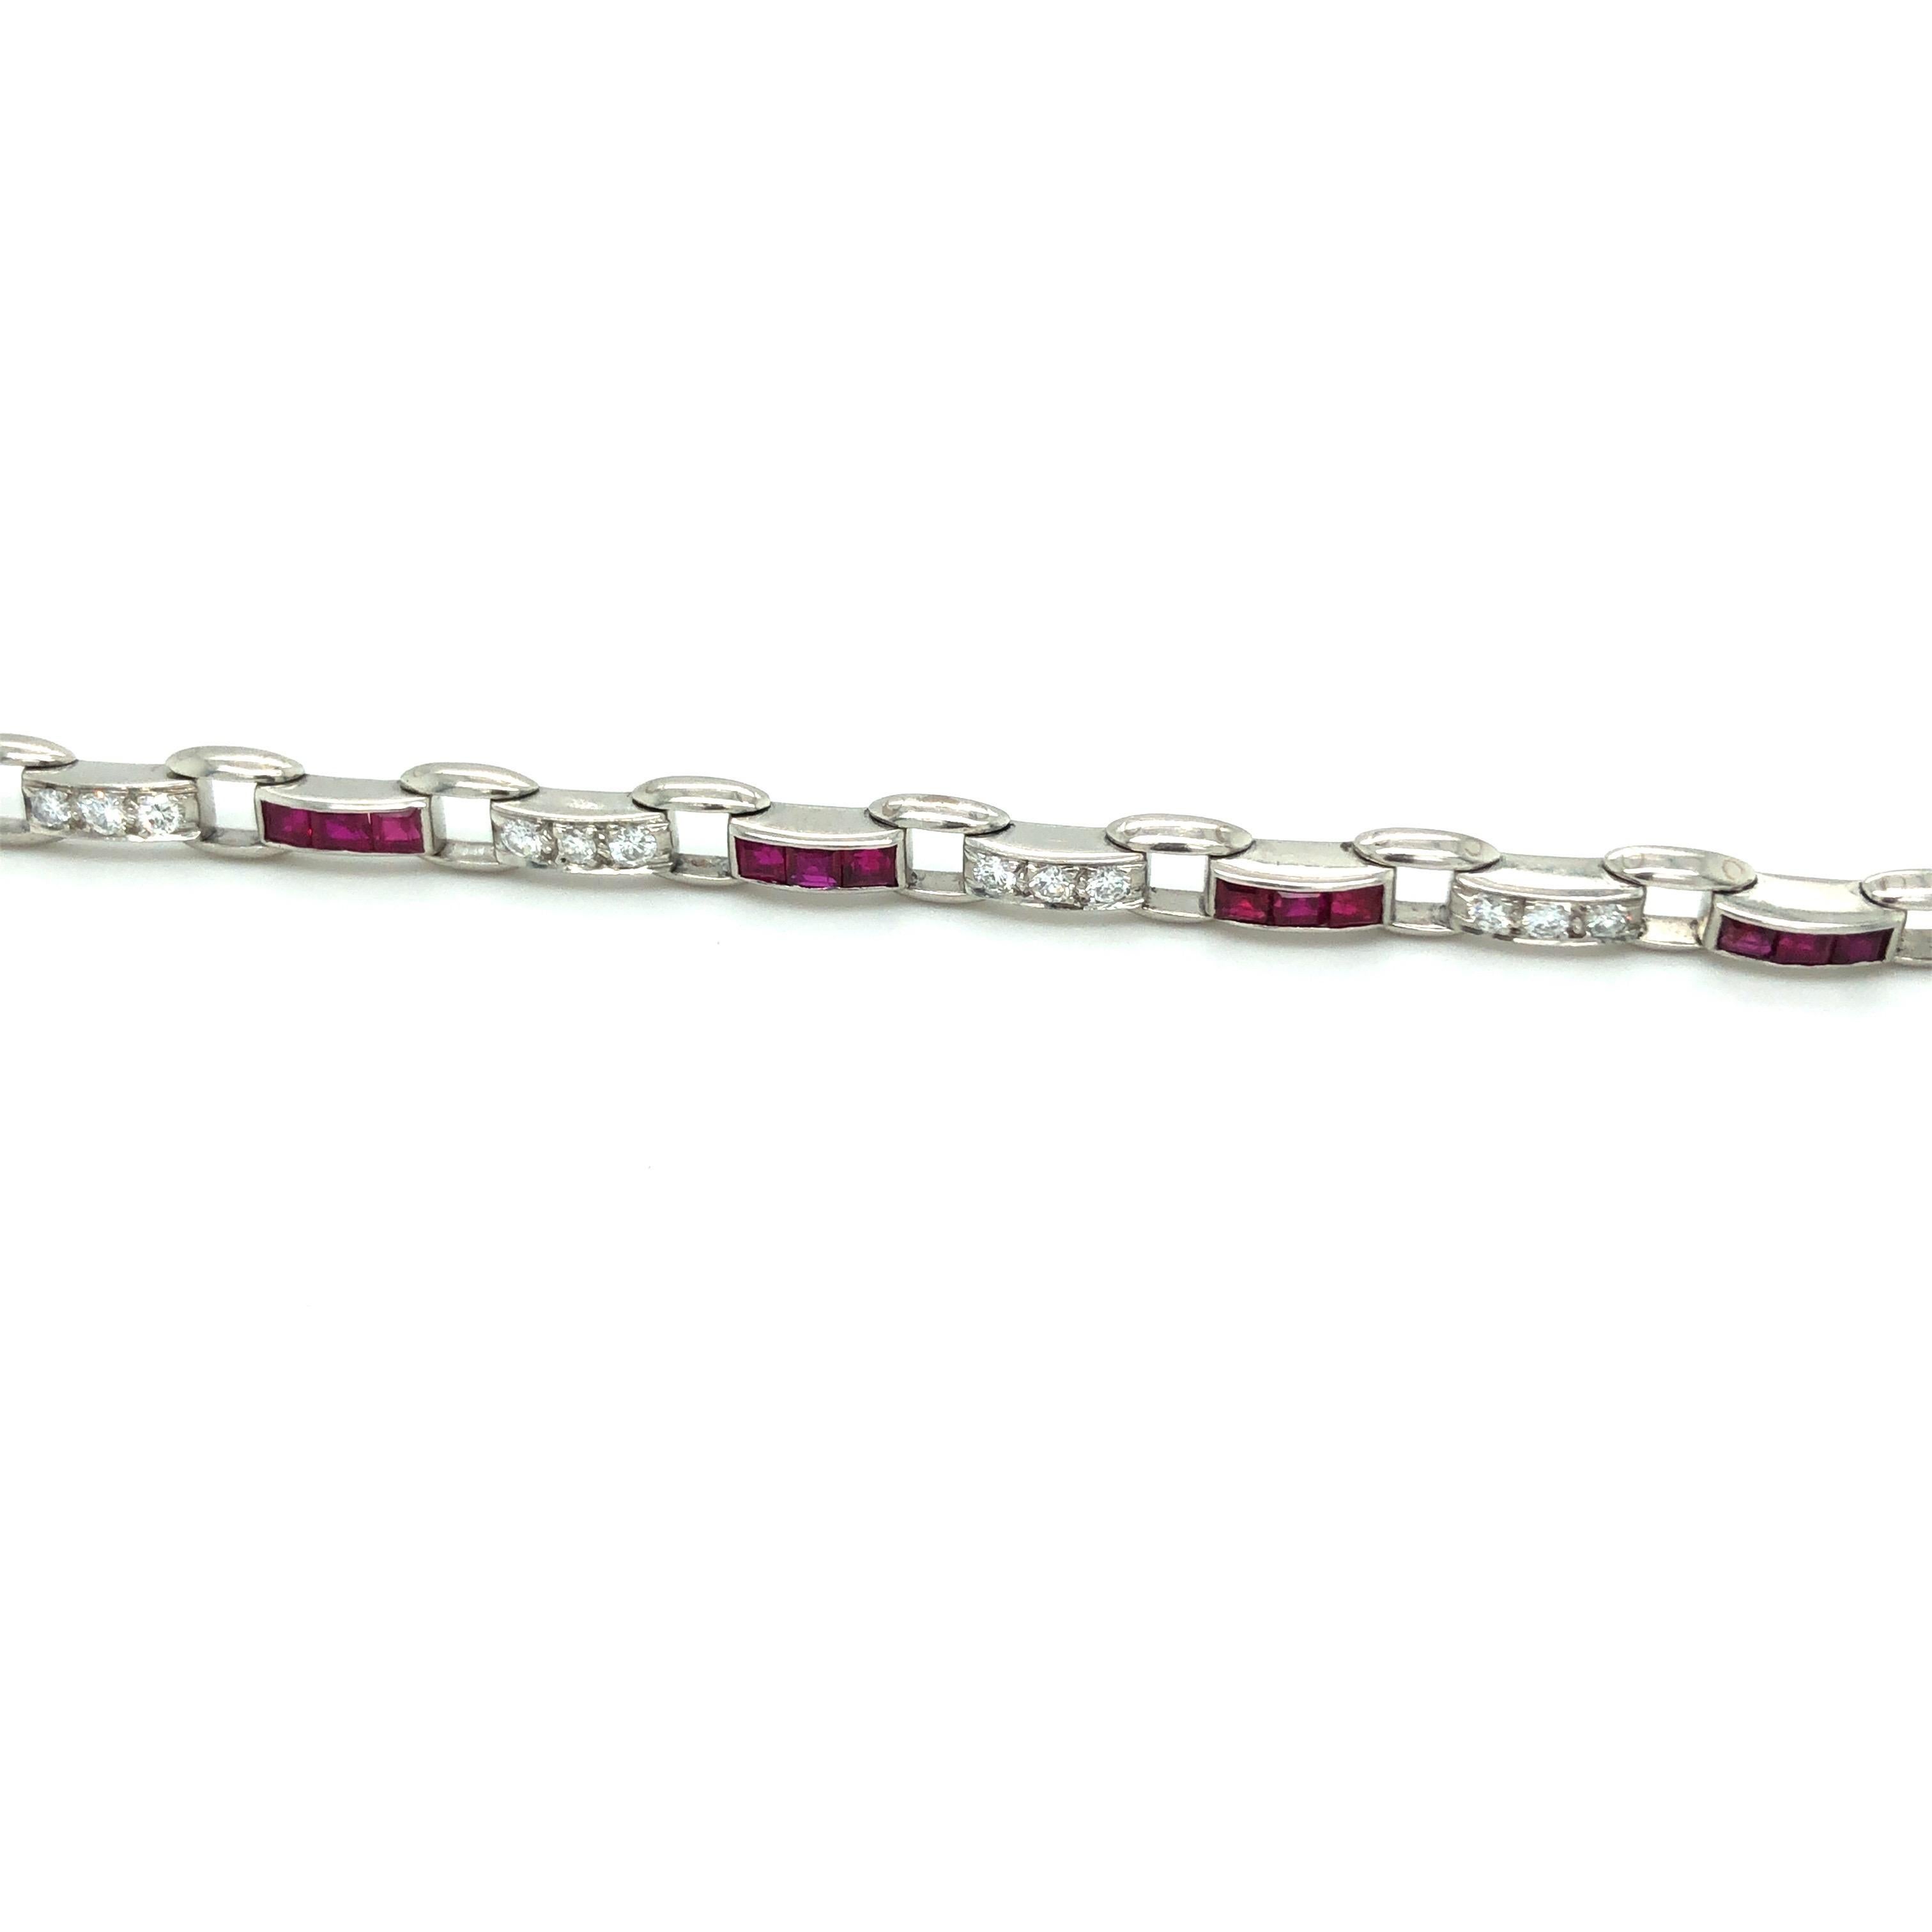 Exquisite Burma rubies and round cut diamonds platinum link bracelet by Cartier. 
Crafted in platinum and set with 24 carré-cut unheated Burma rubies totalling circa 2 carats and 24 brilliant-cut diamonds totalling circa 0.7 carats. The links are